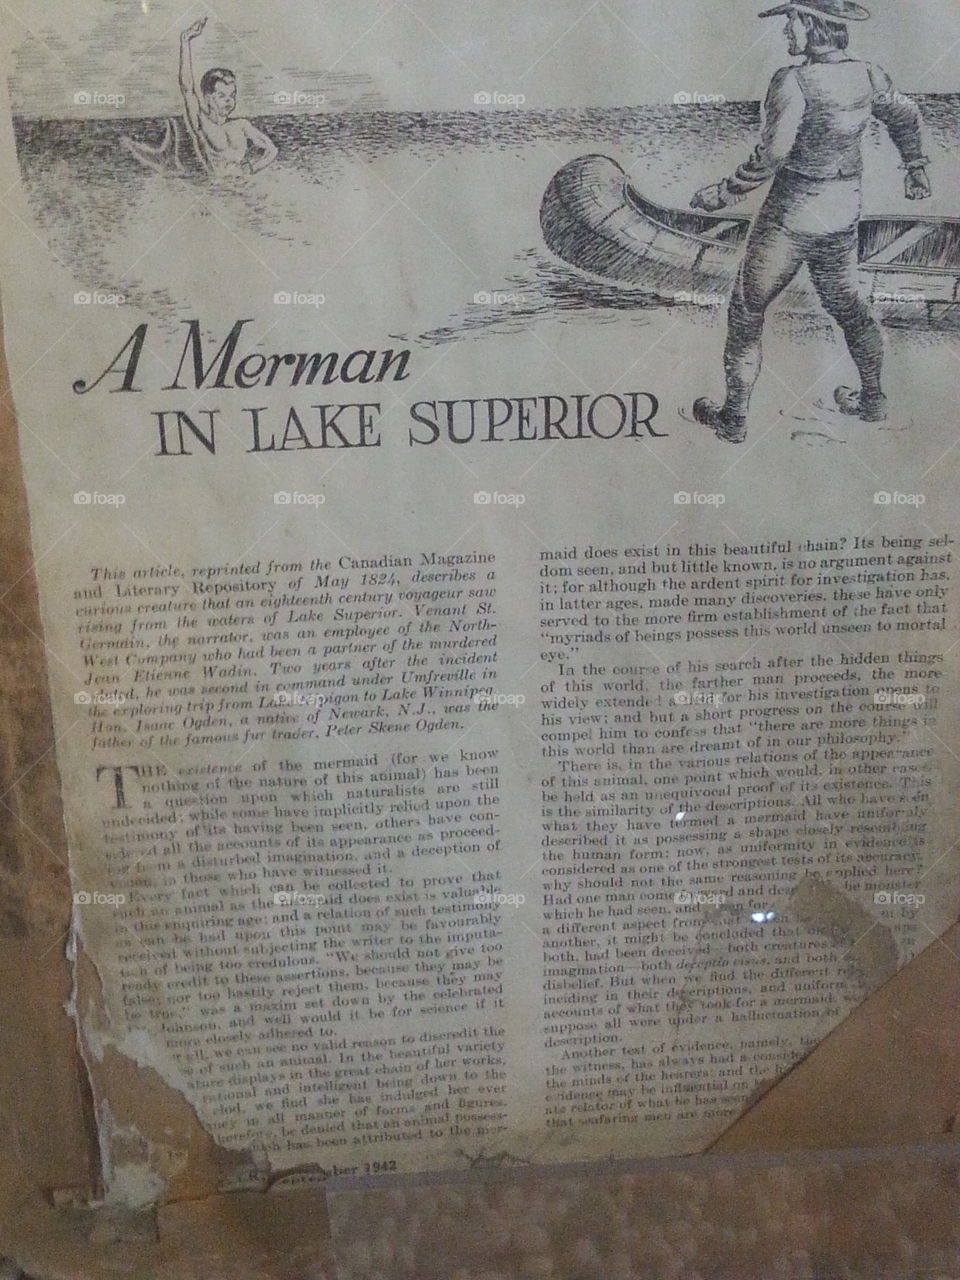 About the Merman found in Lake Superior